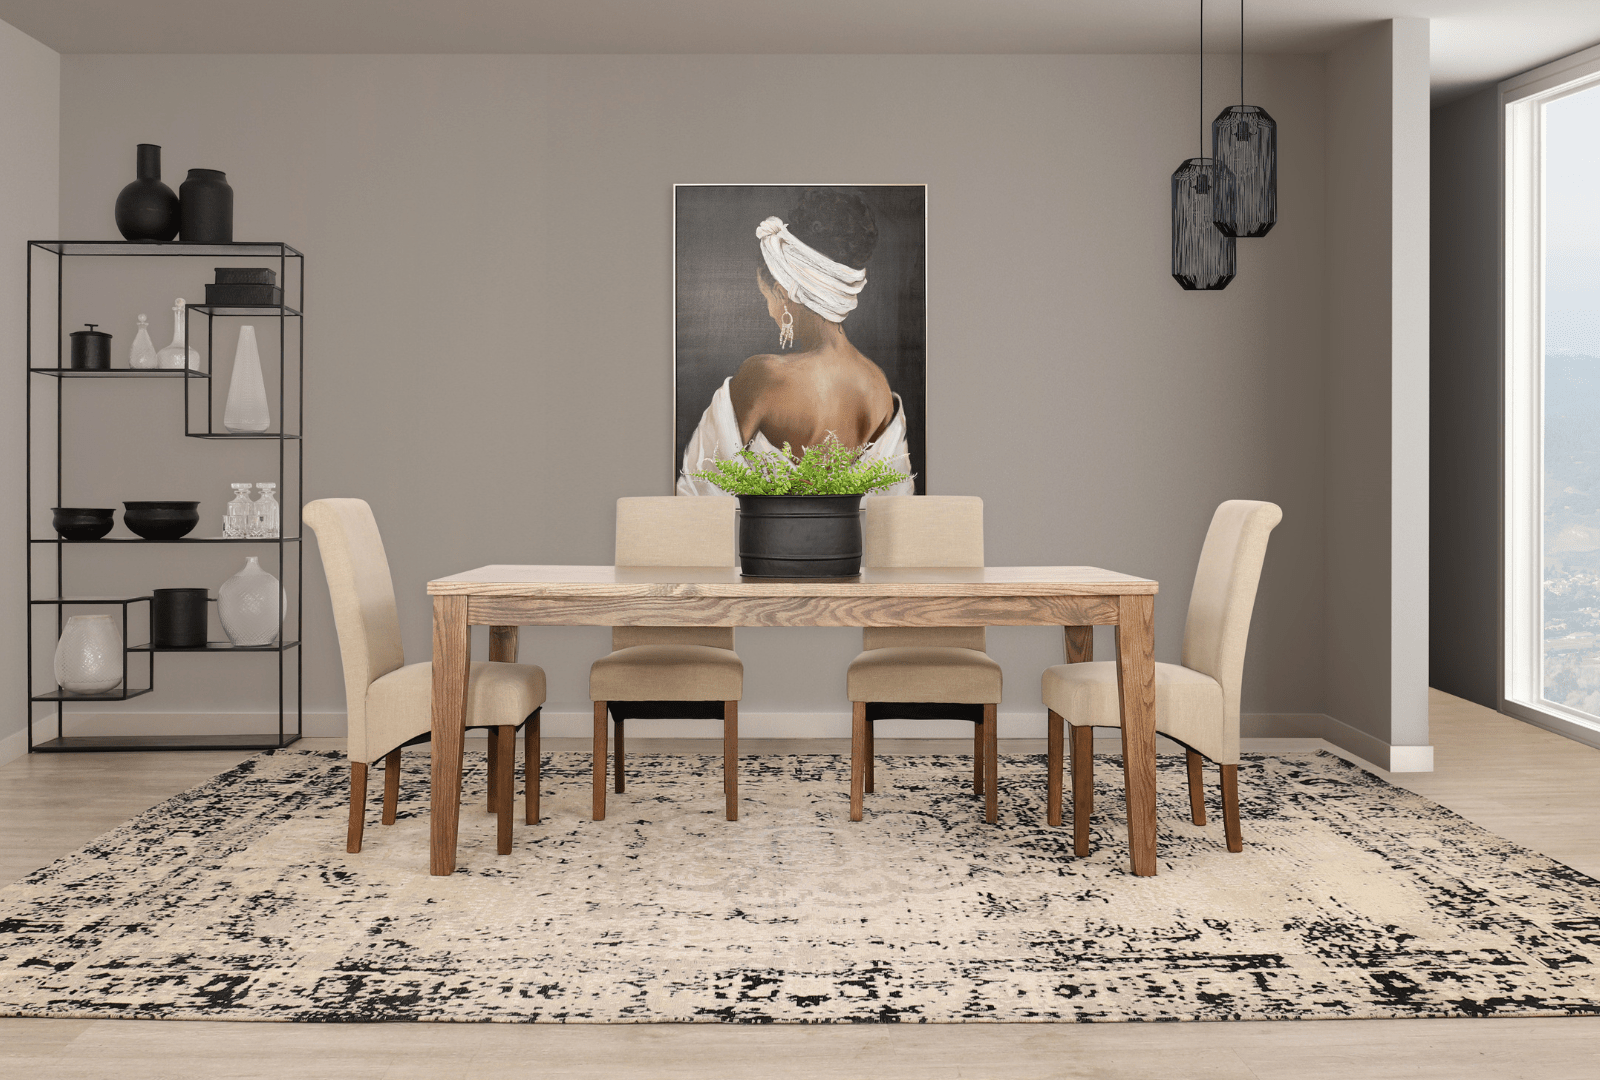 A Dining Table Buying Guide - Choosing the Right Dining Table: Size, Shape, and Style Tips